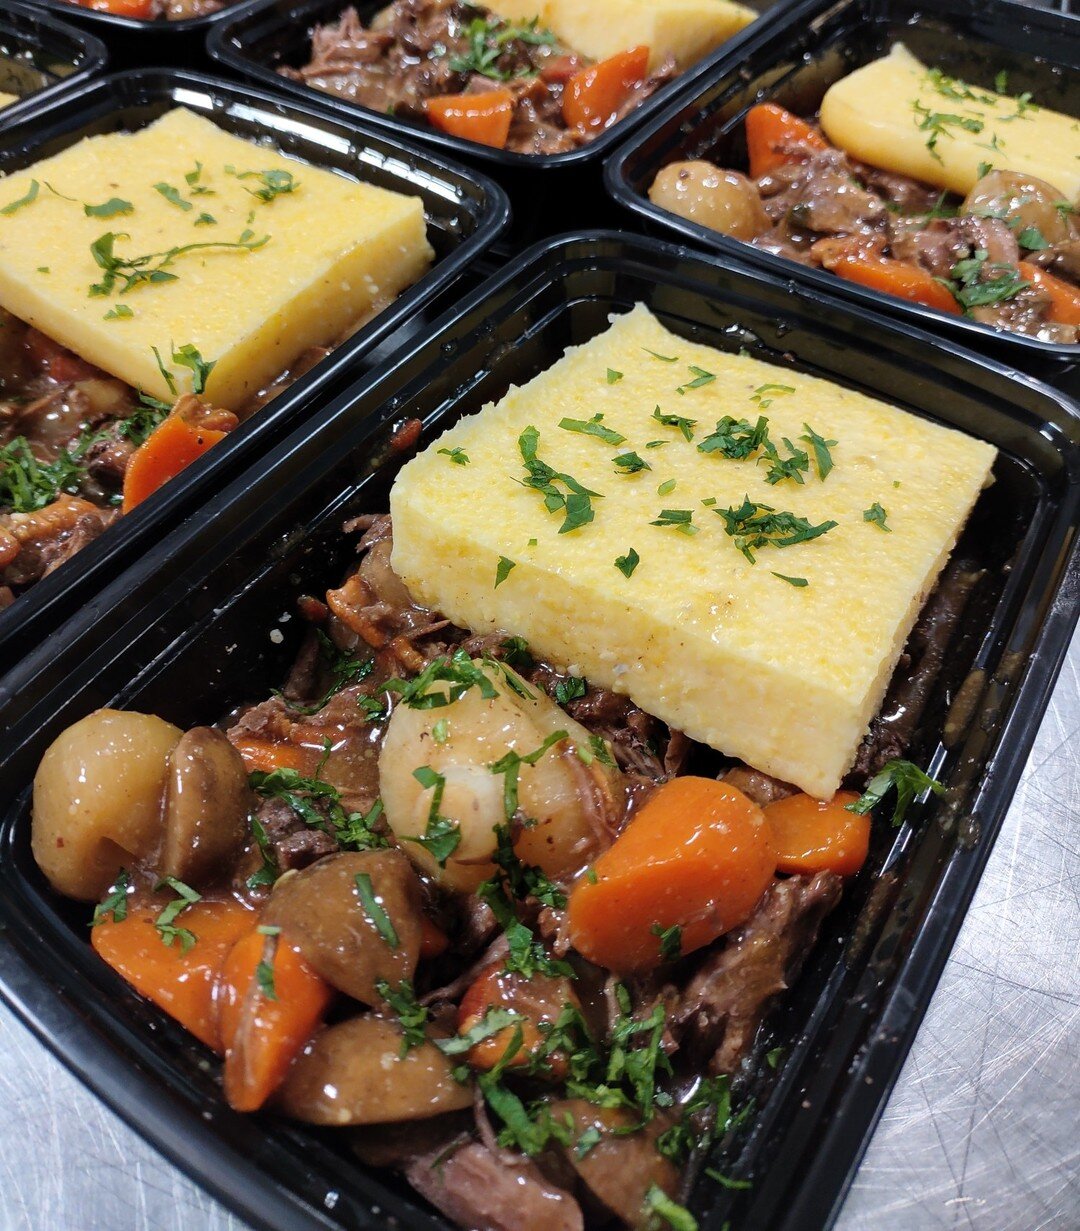 Highlights from our most recent delivery this past Monday: Beef Bourguignon with polenta, Rajma Chaawal, and our house salad with sherry vinaigrette and oven dried tomatoes.